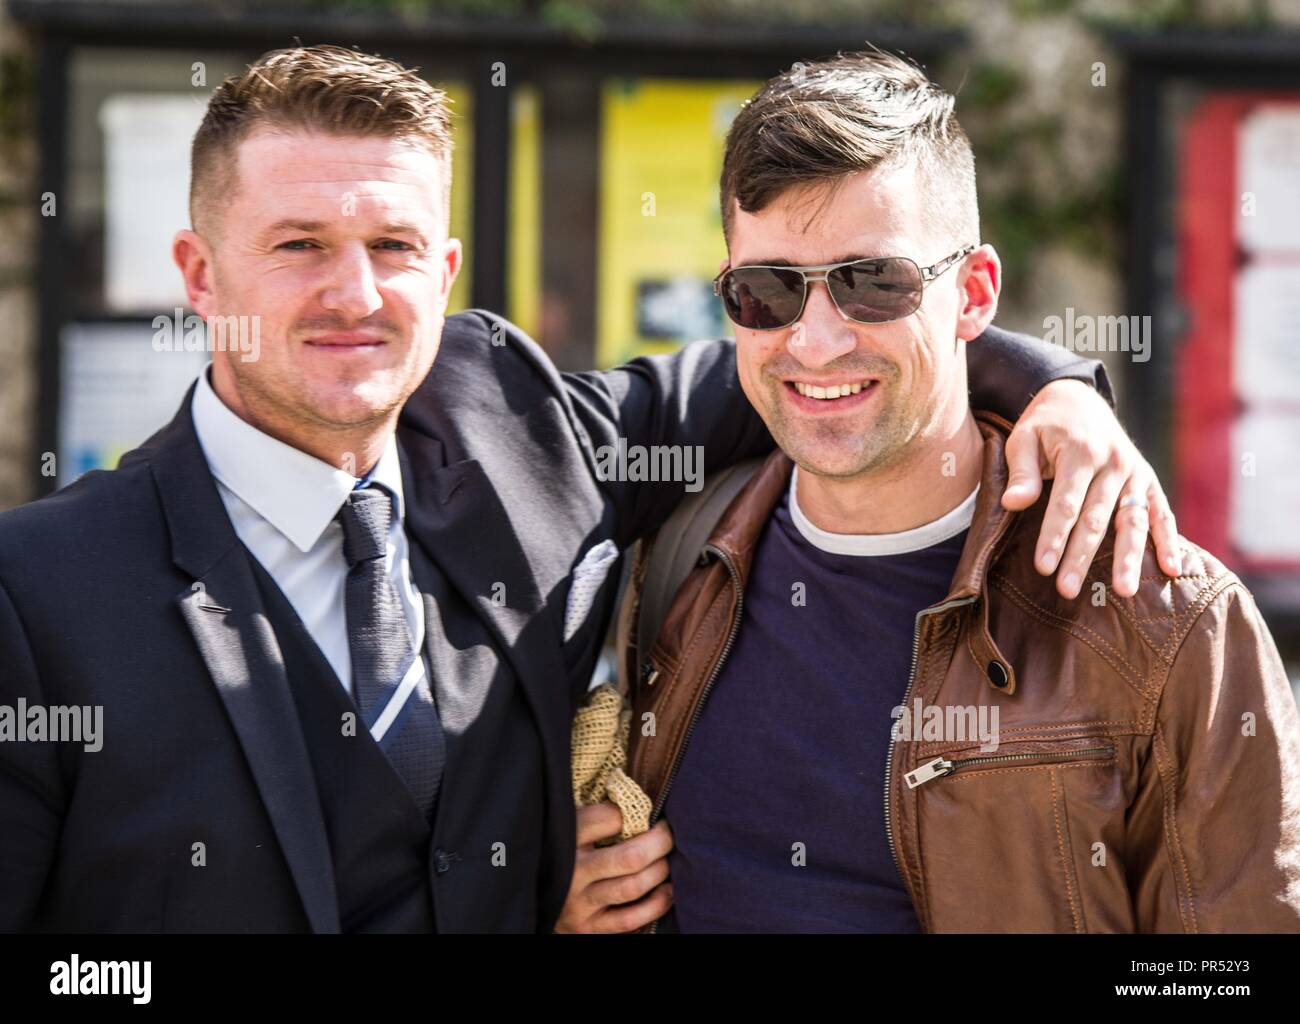 Garmisch Partenkirchen, Bavaria, Germany. 29th Sep, 2018. EDL founder TOMMY ROBINSON with Austrian right-extremist and head of the Identitaeren Movement MARTIN SELLNER. Sellner is also associated with white supremacists in the United States and Canada. Adding themselves to the 'who's who'' list of of several hundred right-extremists from Germany, Austria, Switzerland, and other countries, Tommy Robinson, founder of the British EDL, Lutz Bachmann, grounder of Germany's Pegida, and Martin Sellner of the Identitaere Bewegung were guests as the Compact Konferenz held in the internati Stock Photo